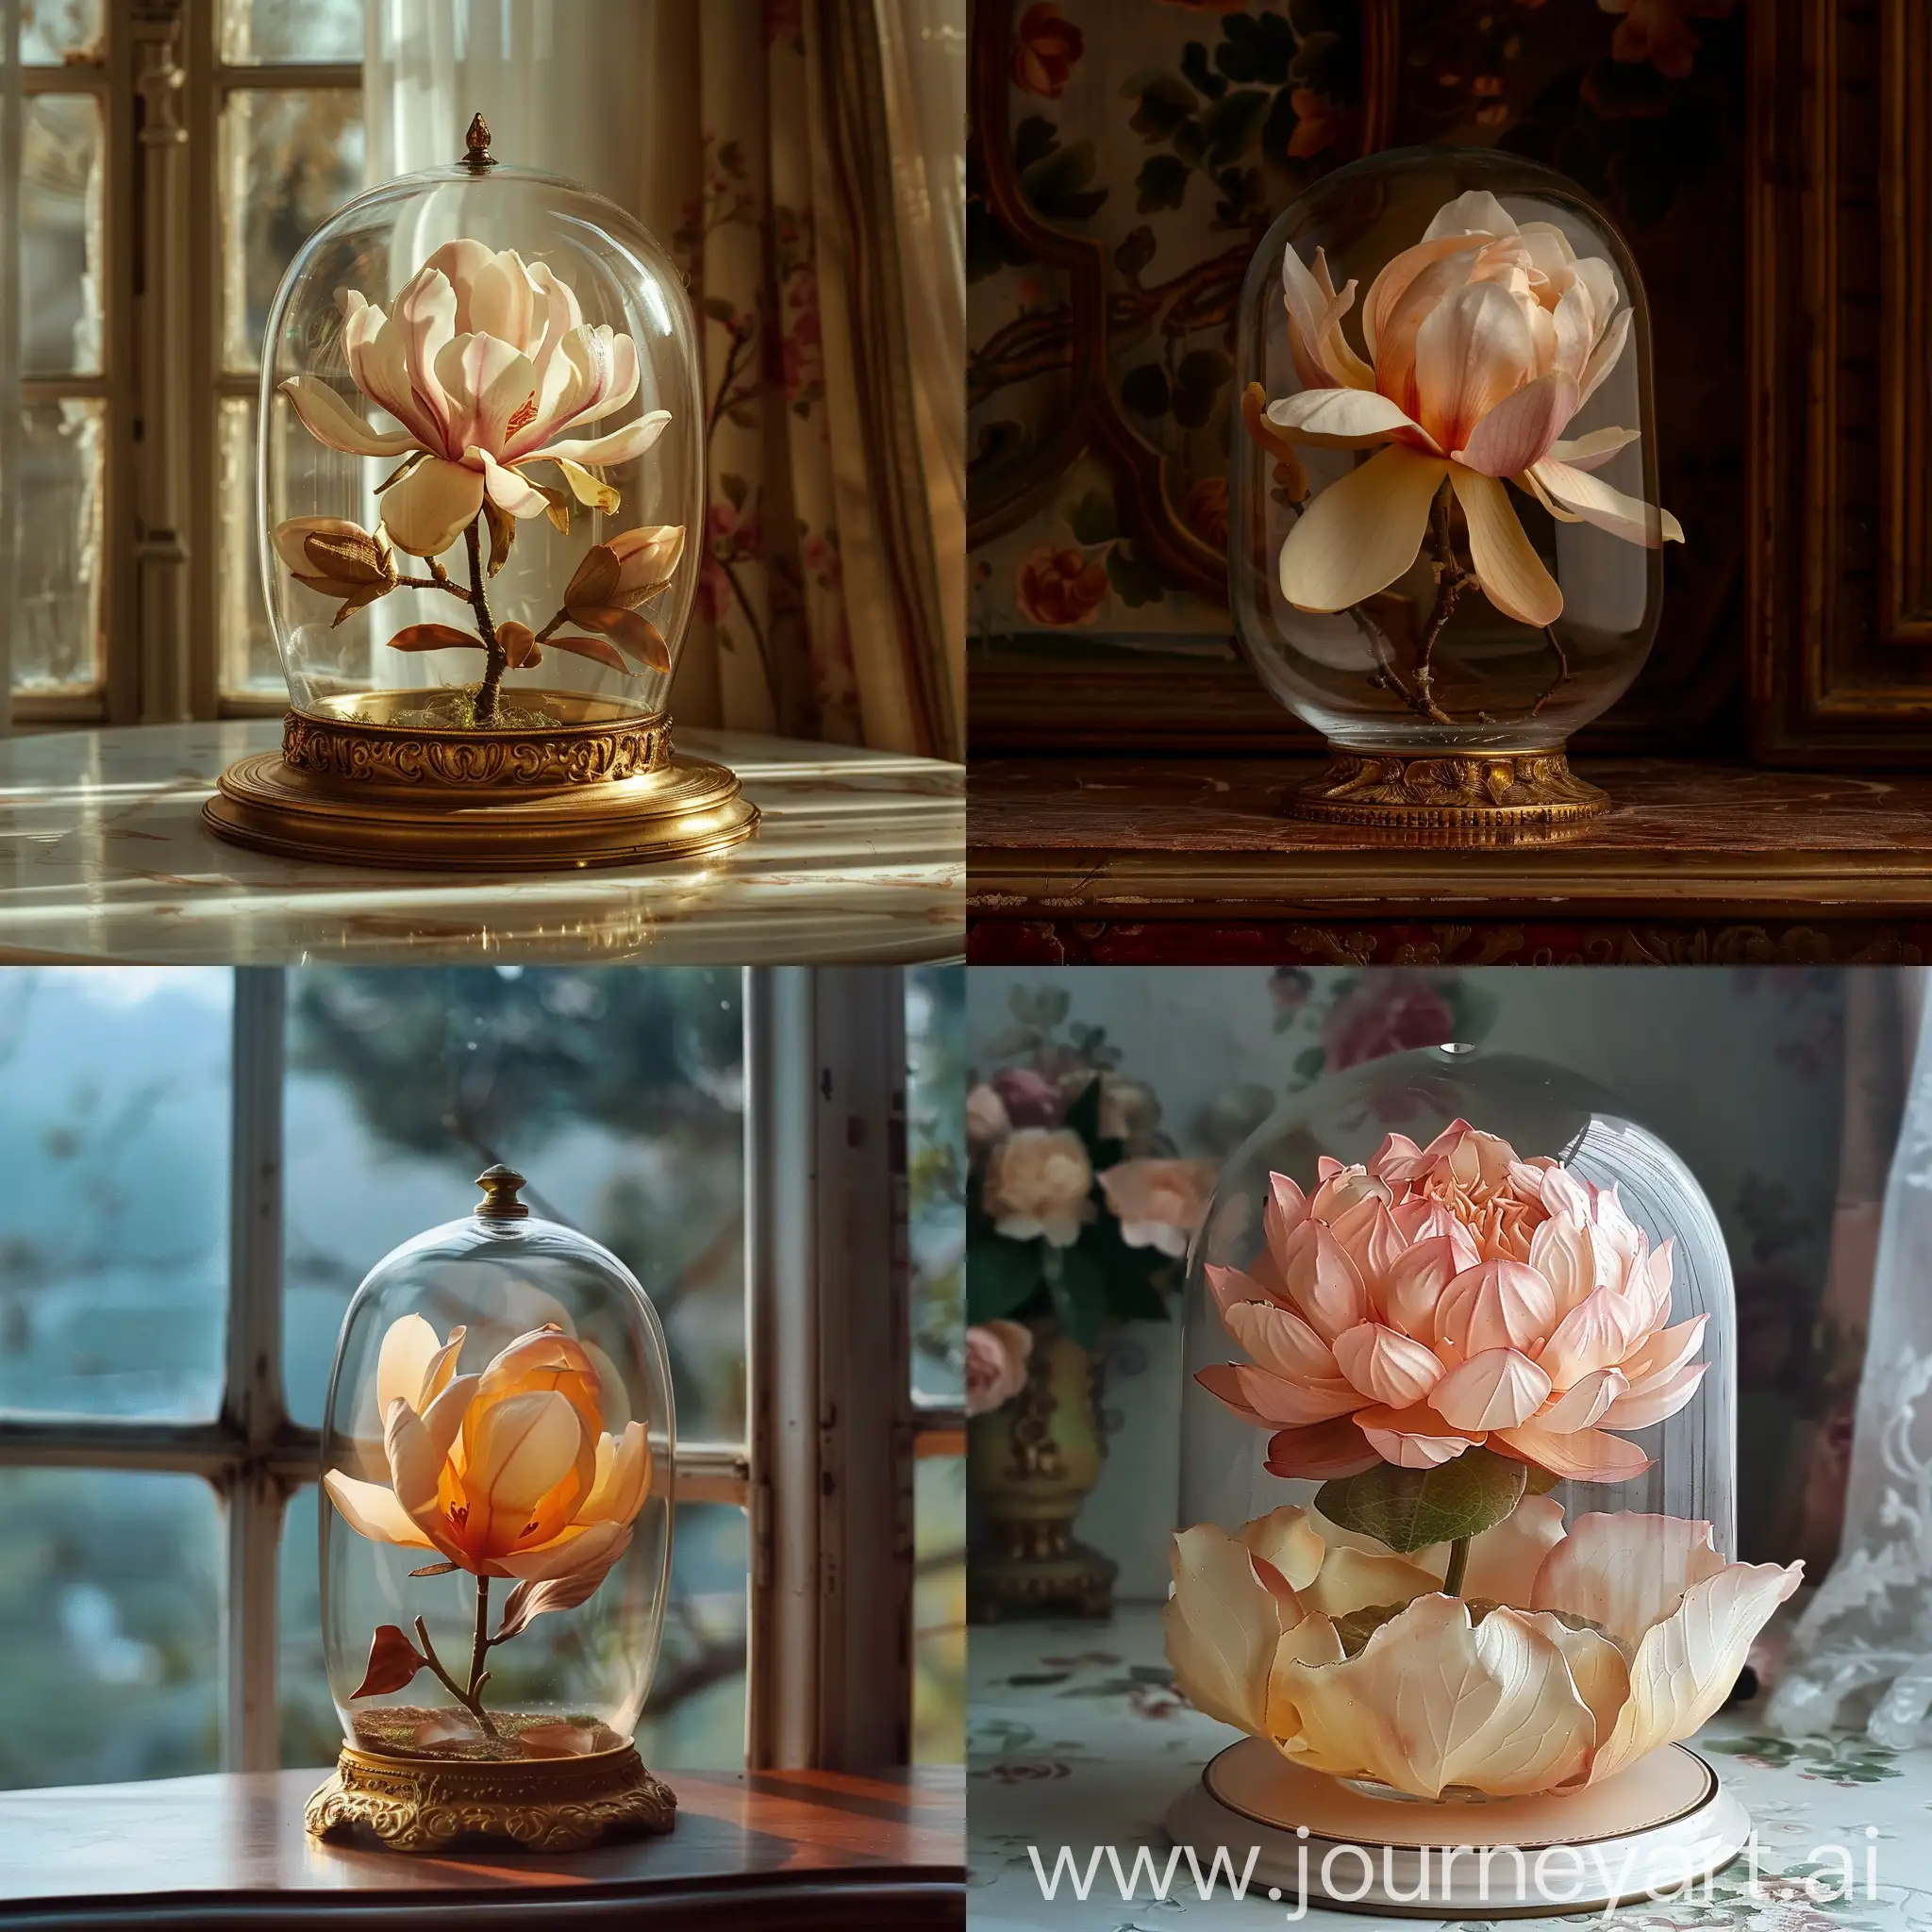 Exquisite-GlassDomed-Flower-Display-in-Royal-Morning-Setting